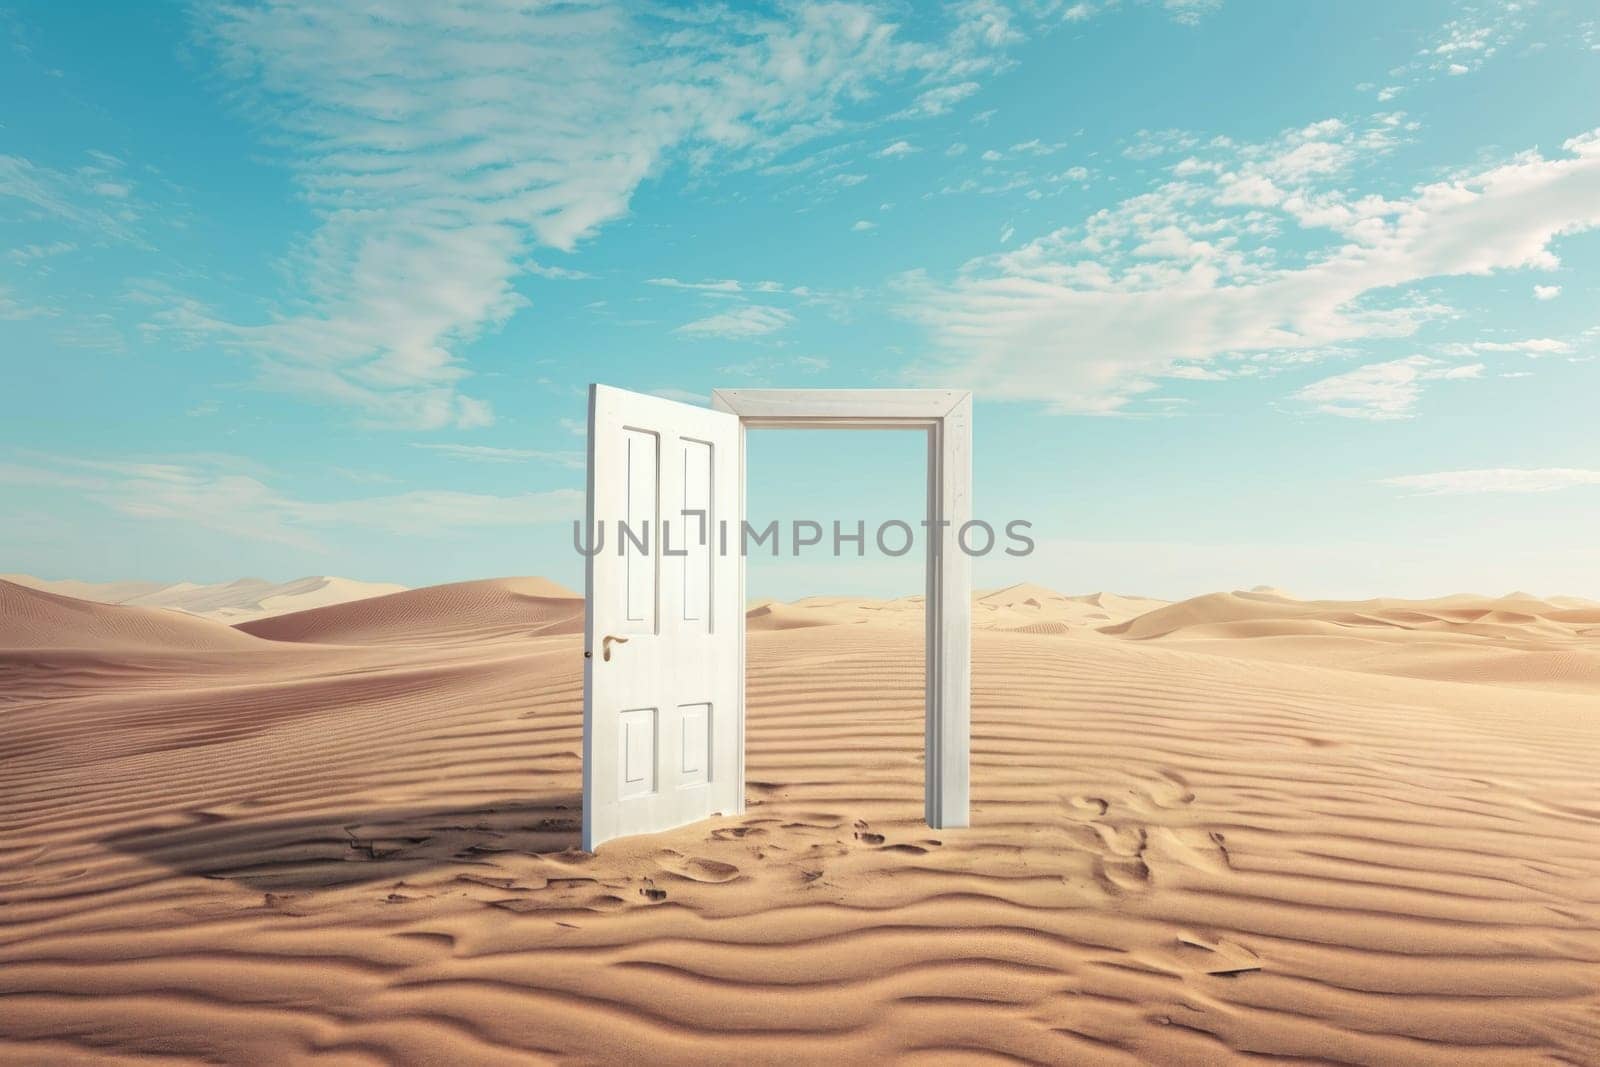 A white door is open in a desert. The door is the only thing visible in the scene